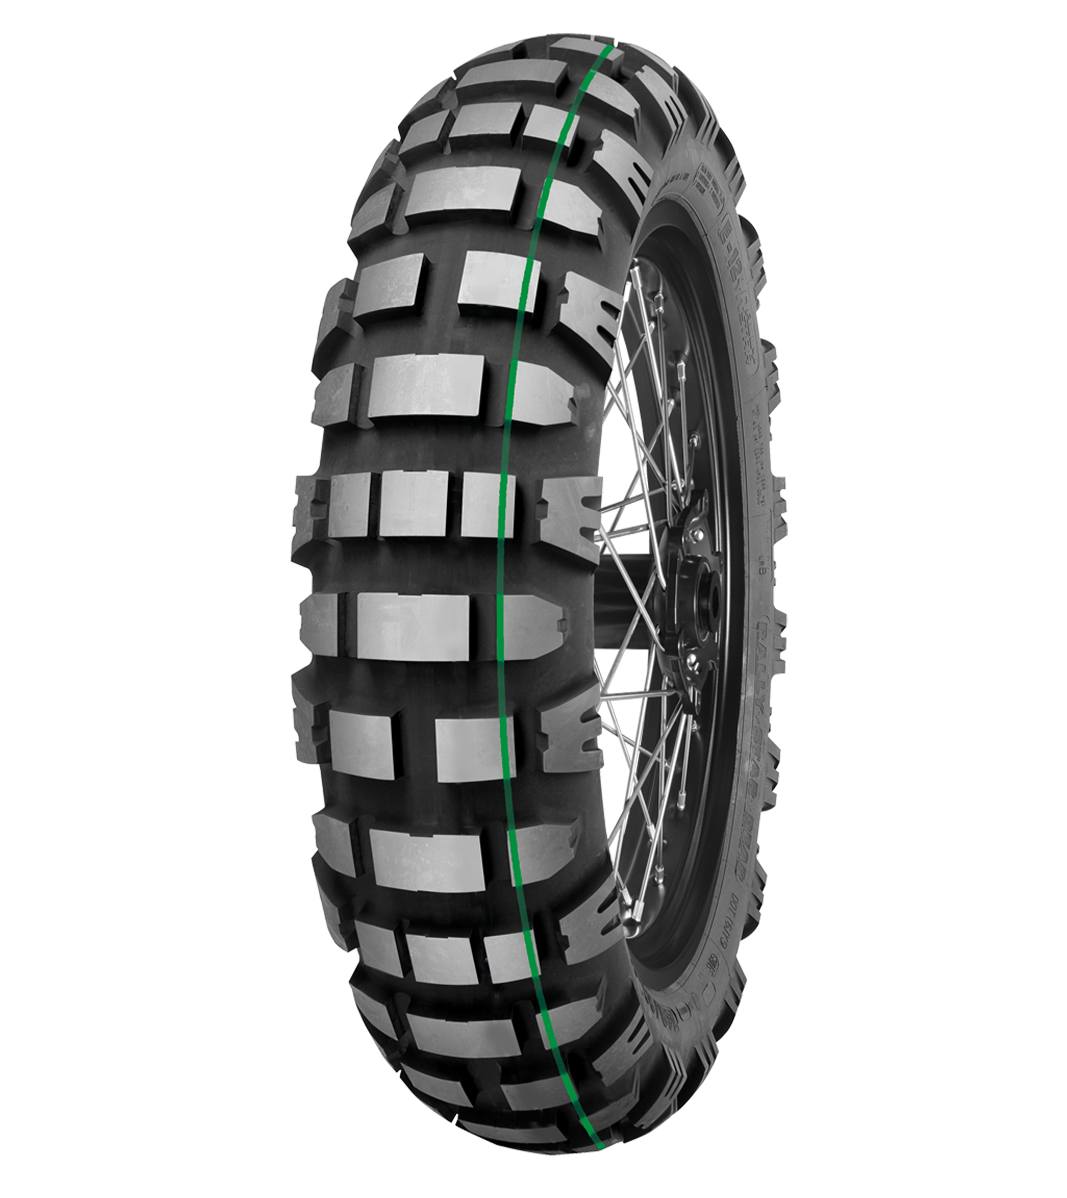 Mitas E-12 Rally Star 140/80-18 Rally Off-Road 70R Green Tube Rear Tire, 224620, 140/80-18, Adventure Touring, E Series, E-12 Rally Star, Off-Road, Rally, Rear, Tires - Imported and distributed in North & South America by Lindeco Genuine Powersports - Premier Powersports Equipment and Accessories for Motorcycle Enthusiasts, Professional Riders and Dealers.